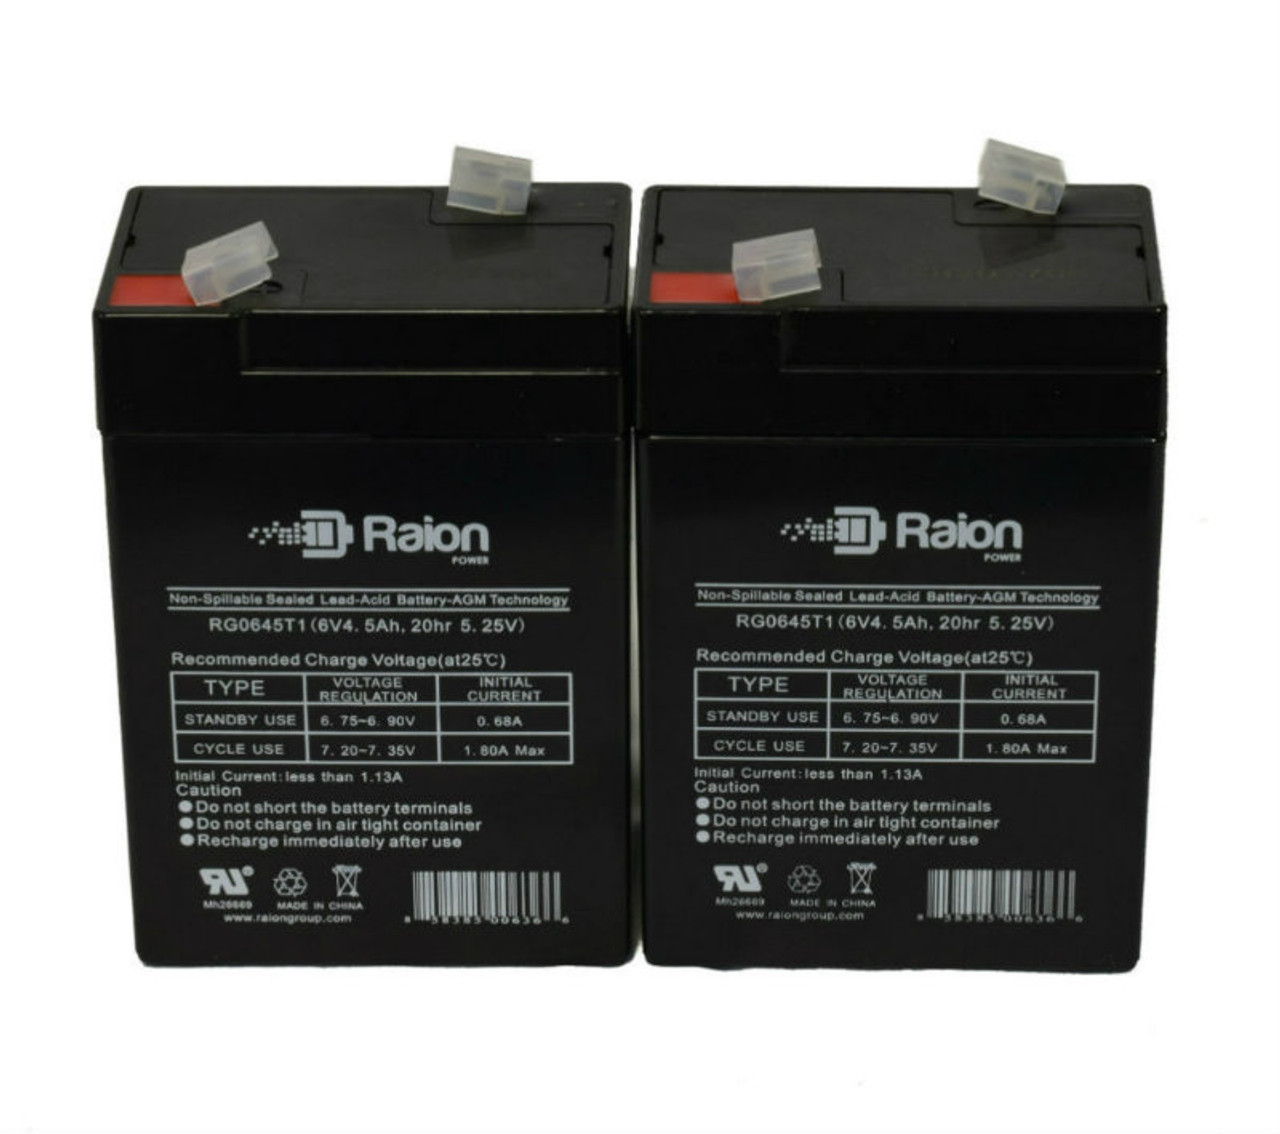 Raion Power 6V 4.5Ah Replacement Emergency Light Battery for Edwards 1660B - 2 Pack